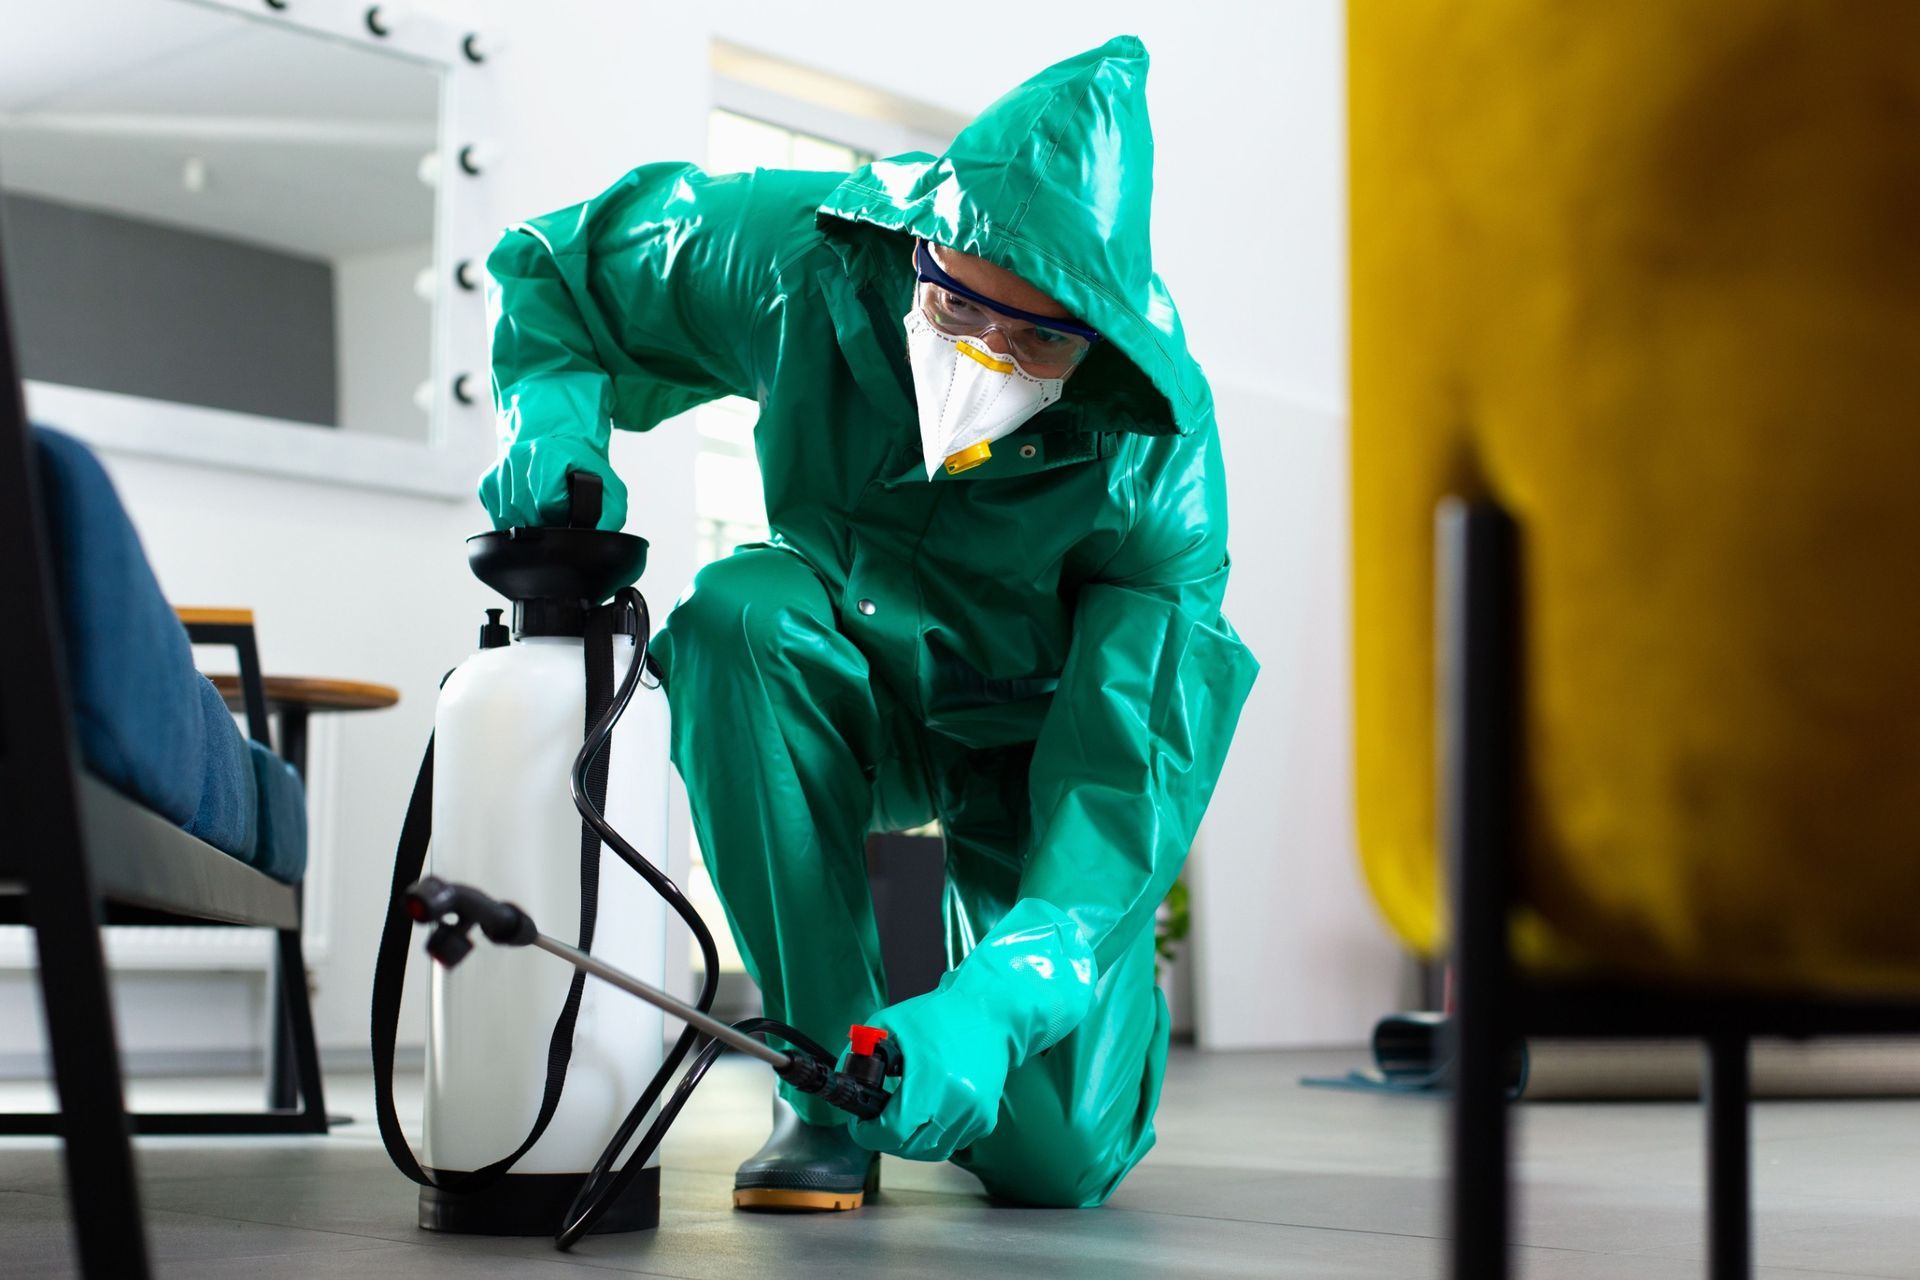 Professional Biohazard Cleaner cleaning a contaminated site